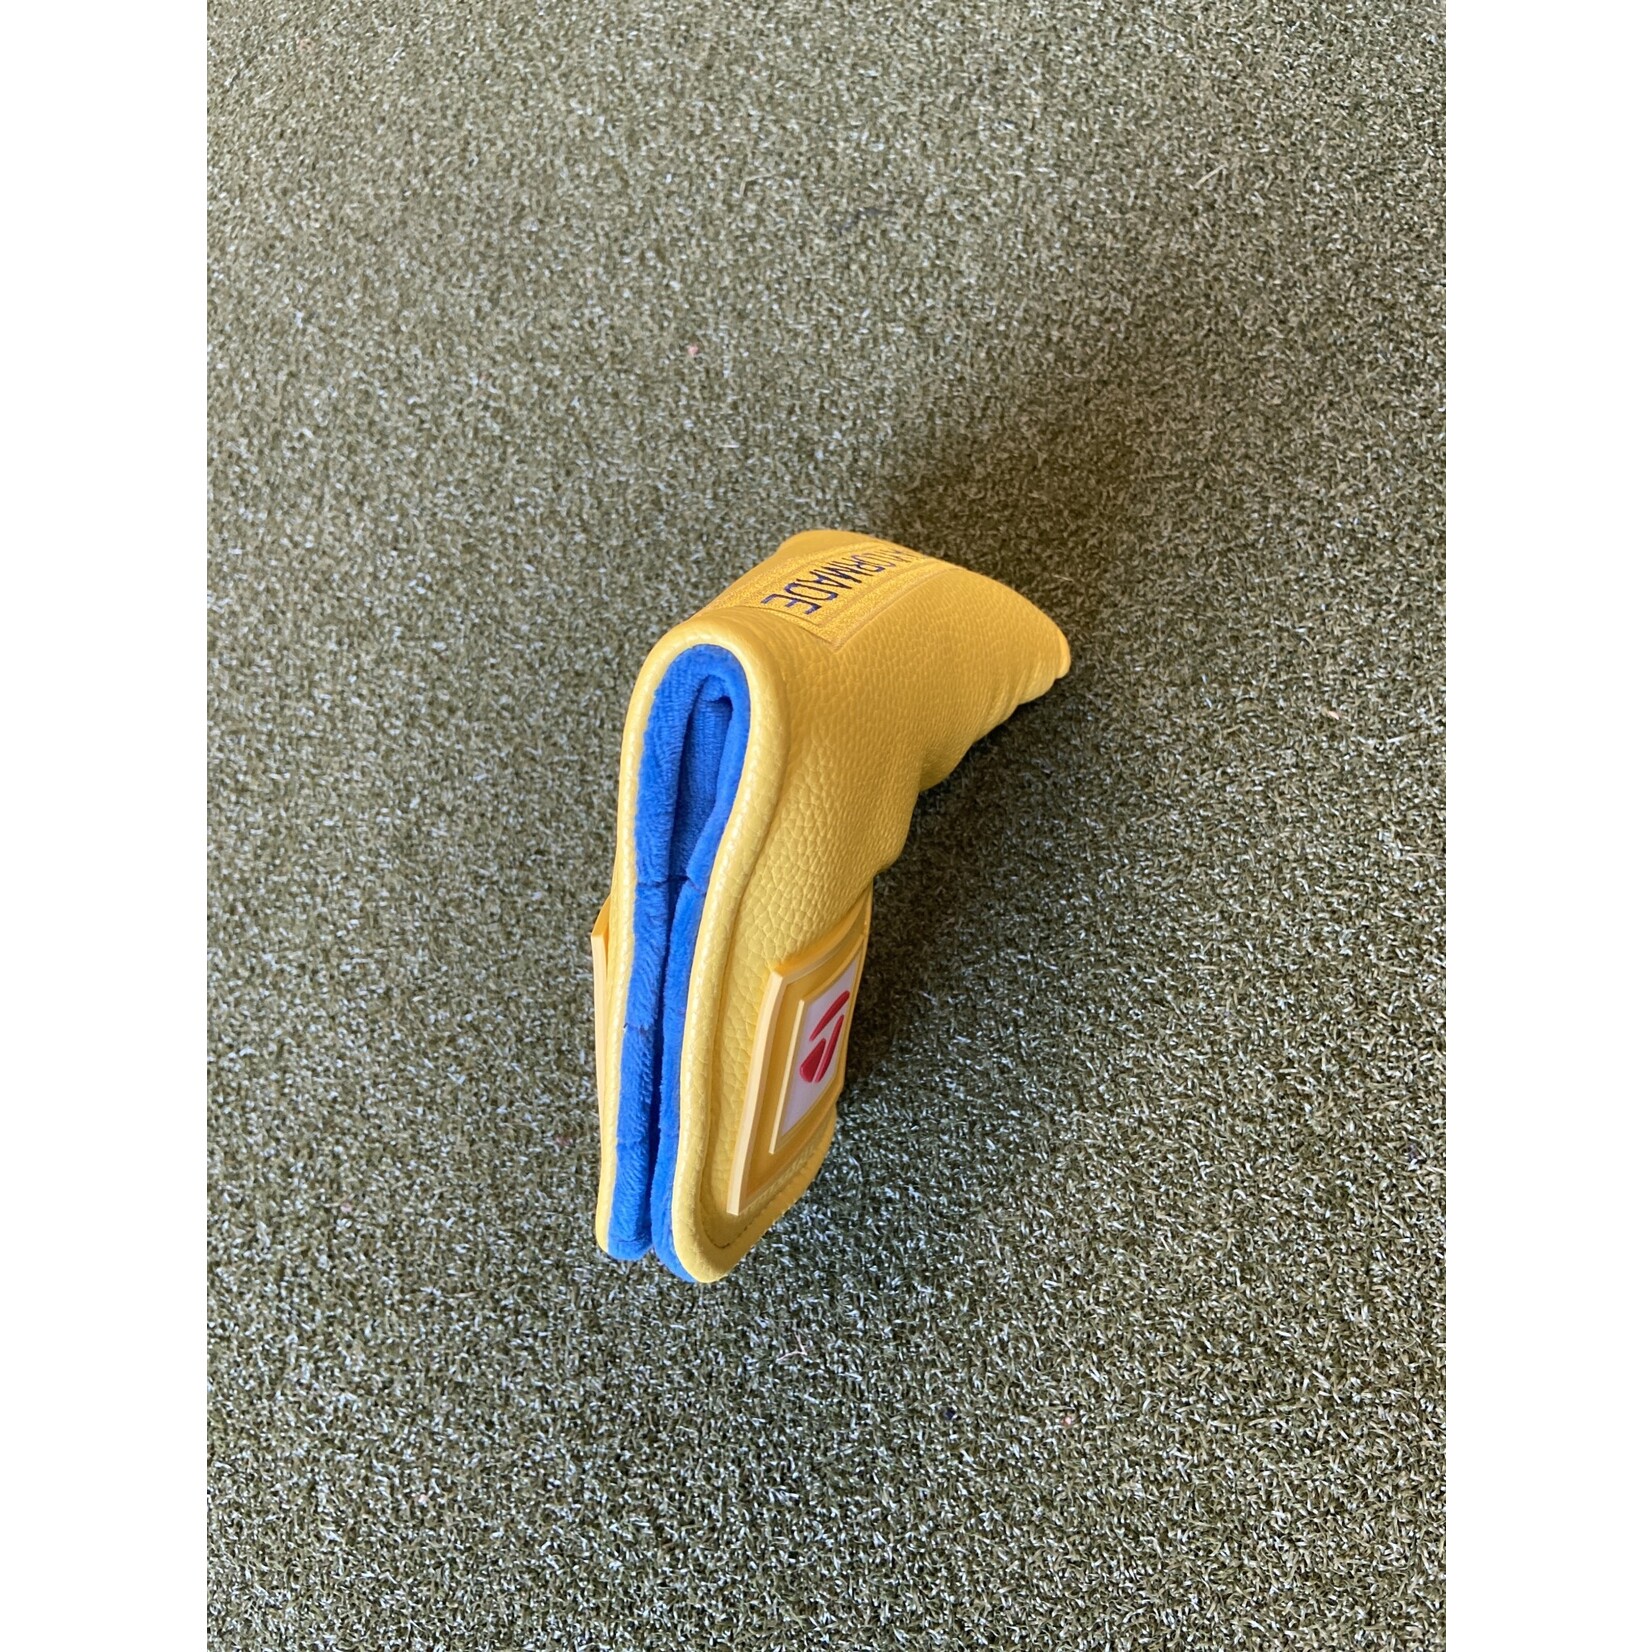 TAYLORMADE Taylormade Open Championship Royal Liverpool Blade Putter Cover Limited Edition